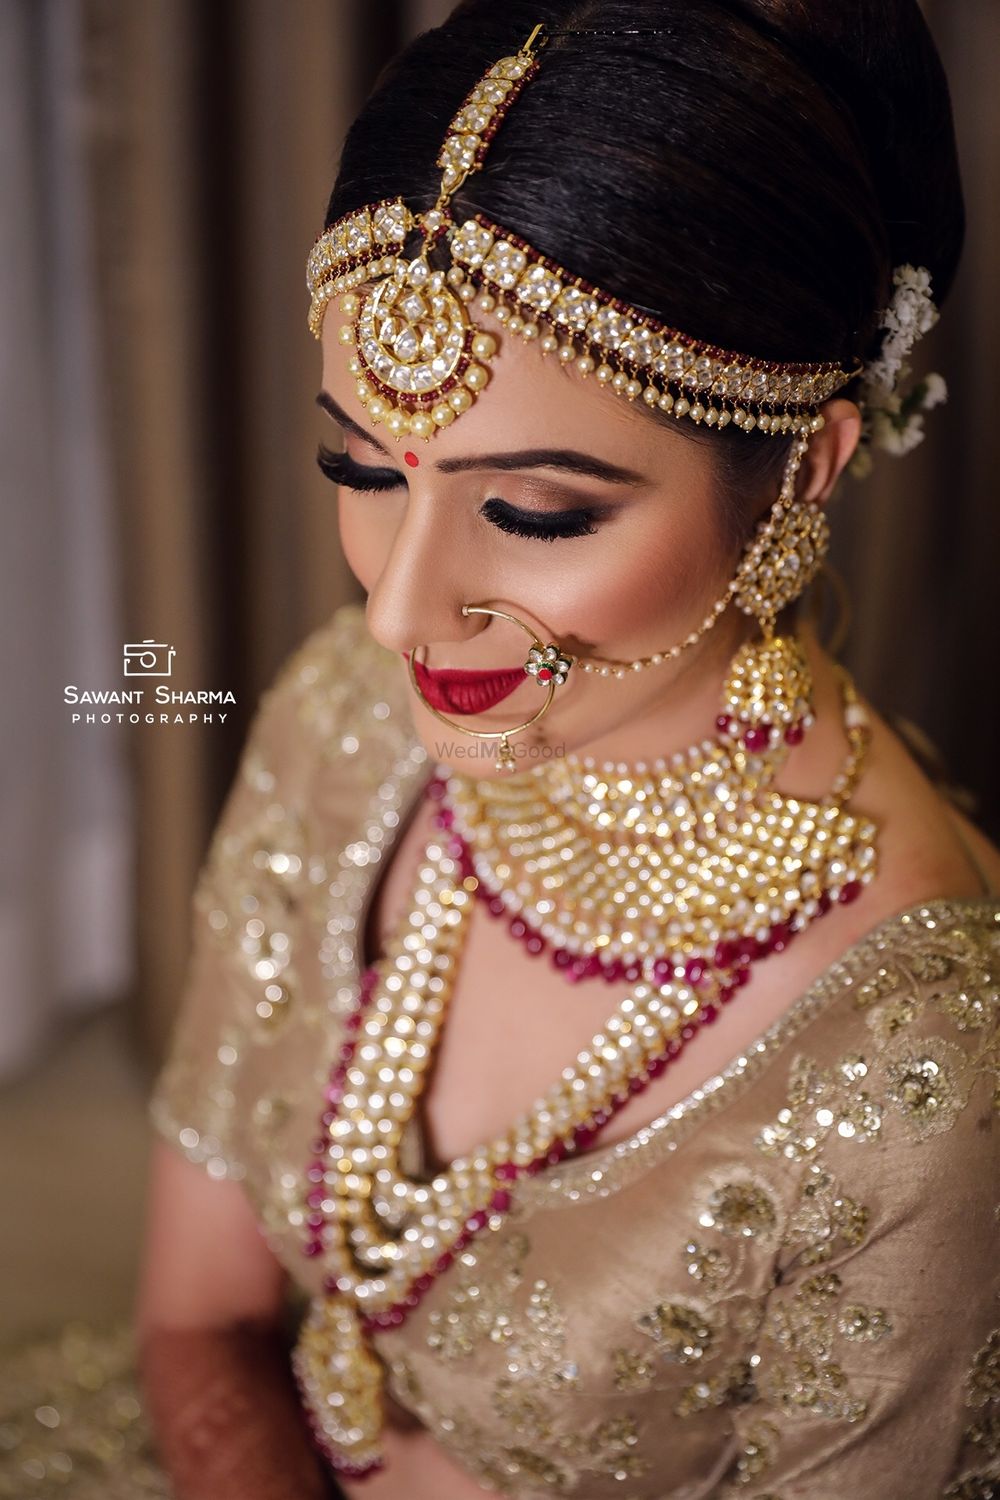 Photo of A bride sitting elegantly in a gold outfit, perfectly complimented by her gold and maroon jewelry. She is seen wearing a polki and jadau choker and a rani haar with gold and maroon beads and a maathi-patti in similar colors.